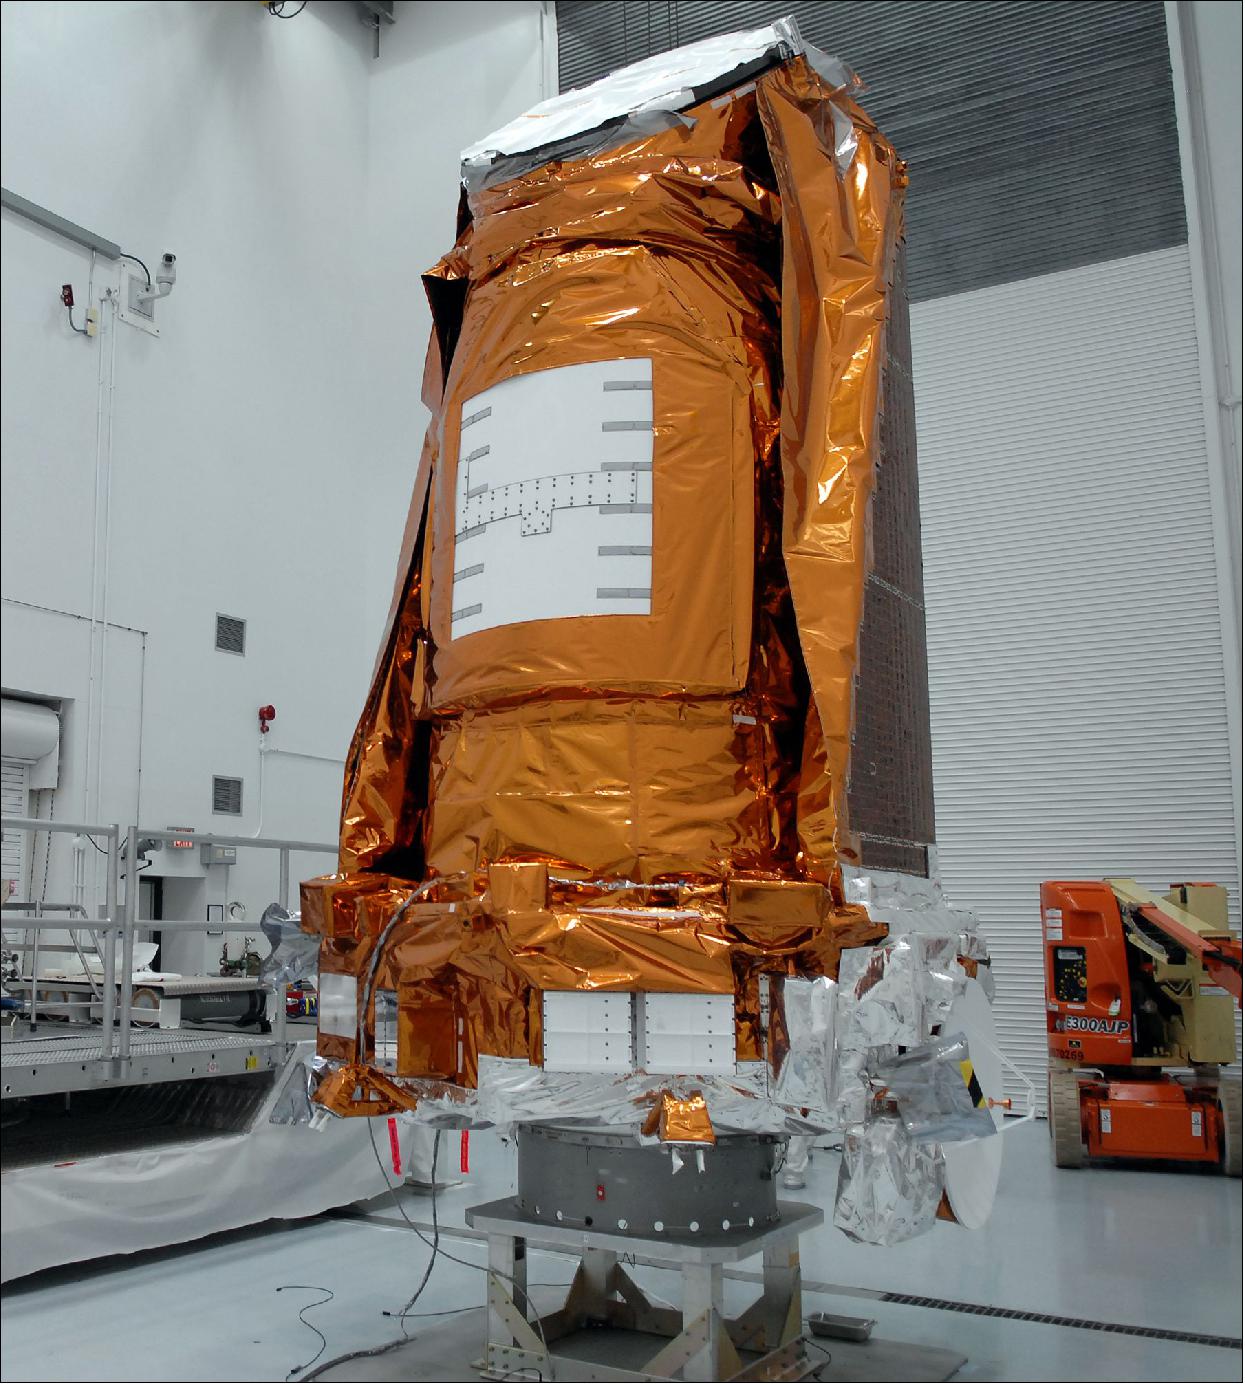 Figure 5: The Kepler spacecraft in Astrotech's Hazardous Processing Facility in Titusville, FL in February 2009 (image credit: NASA)